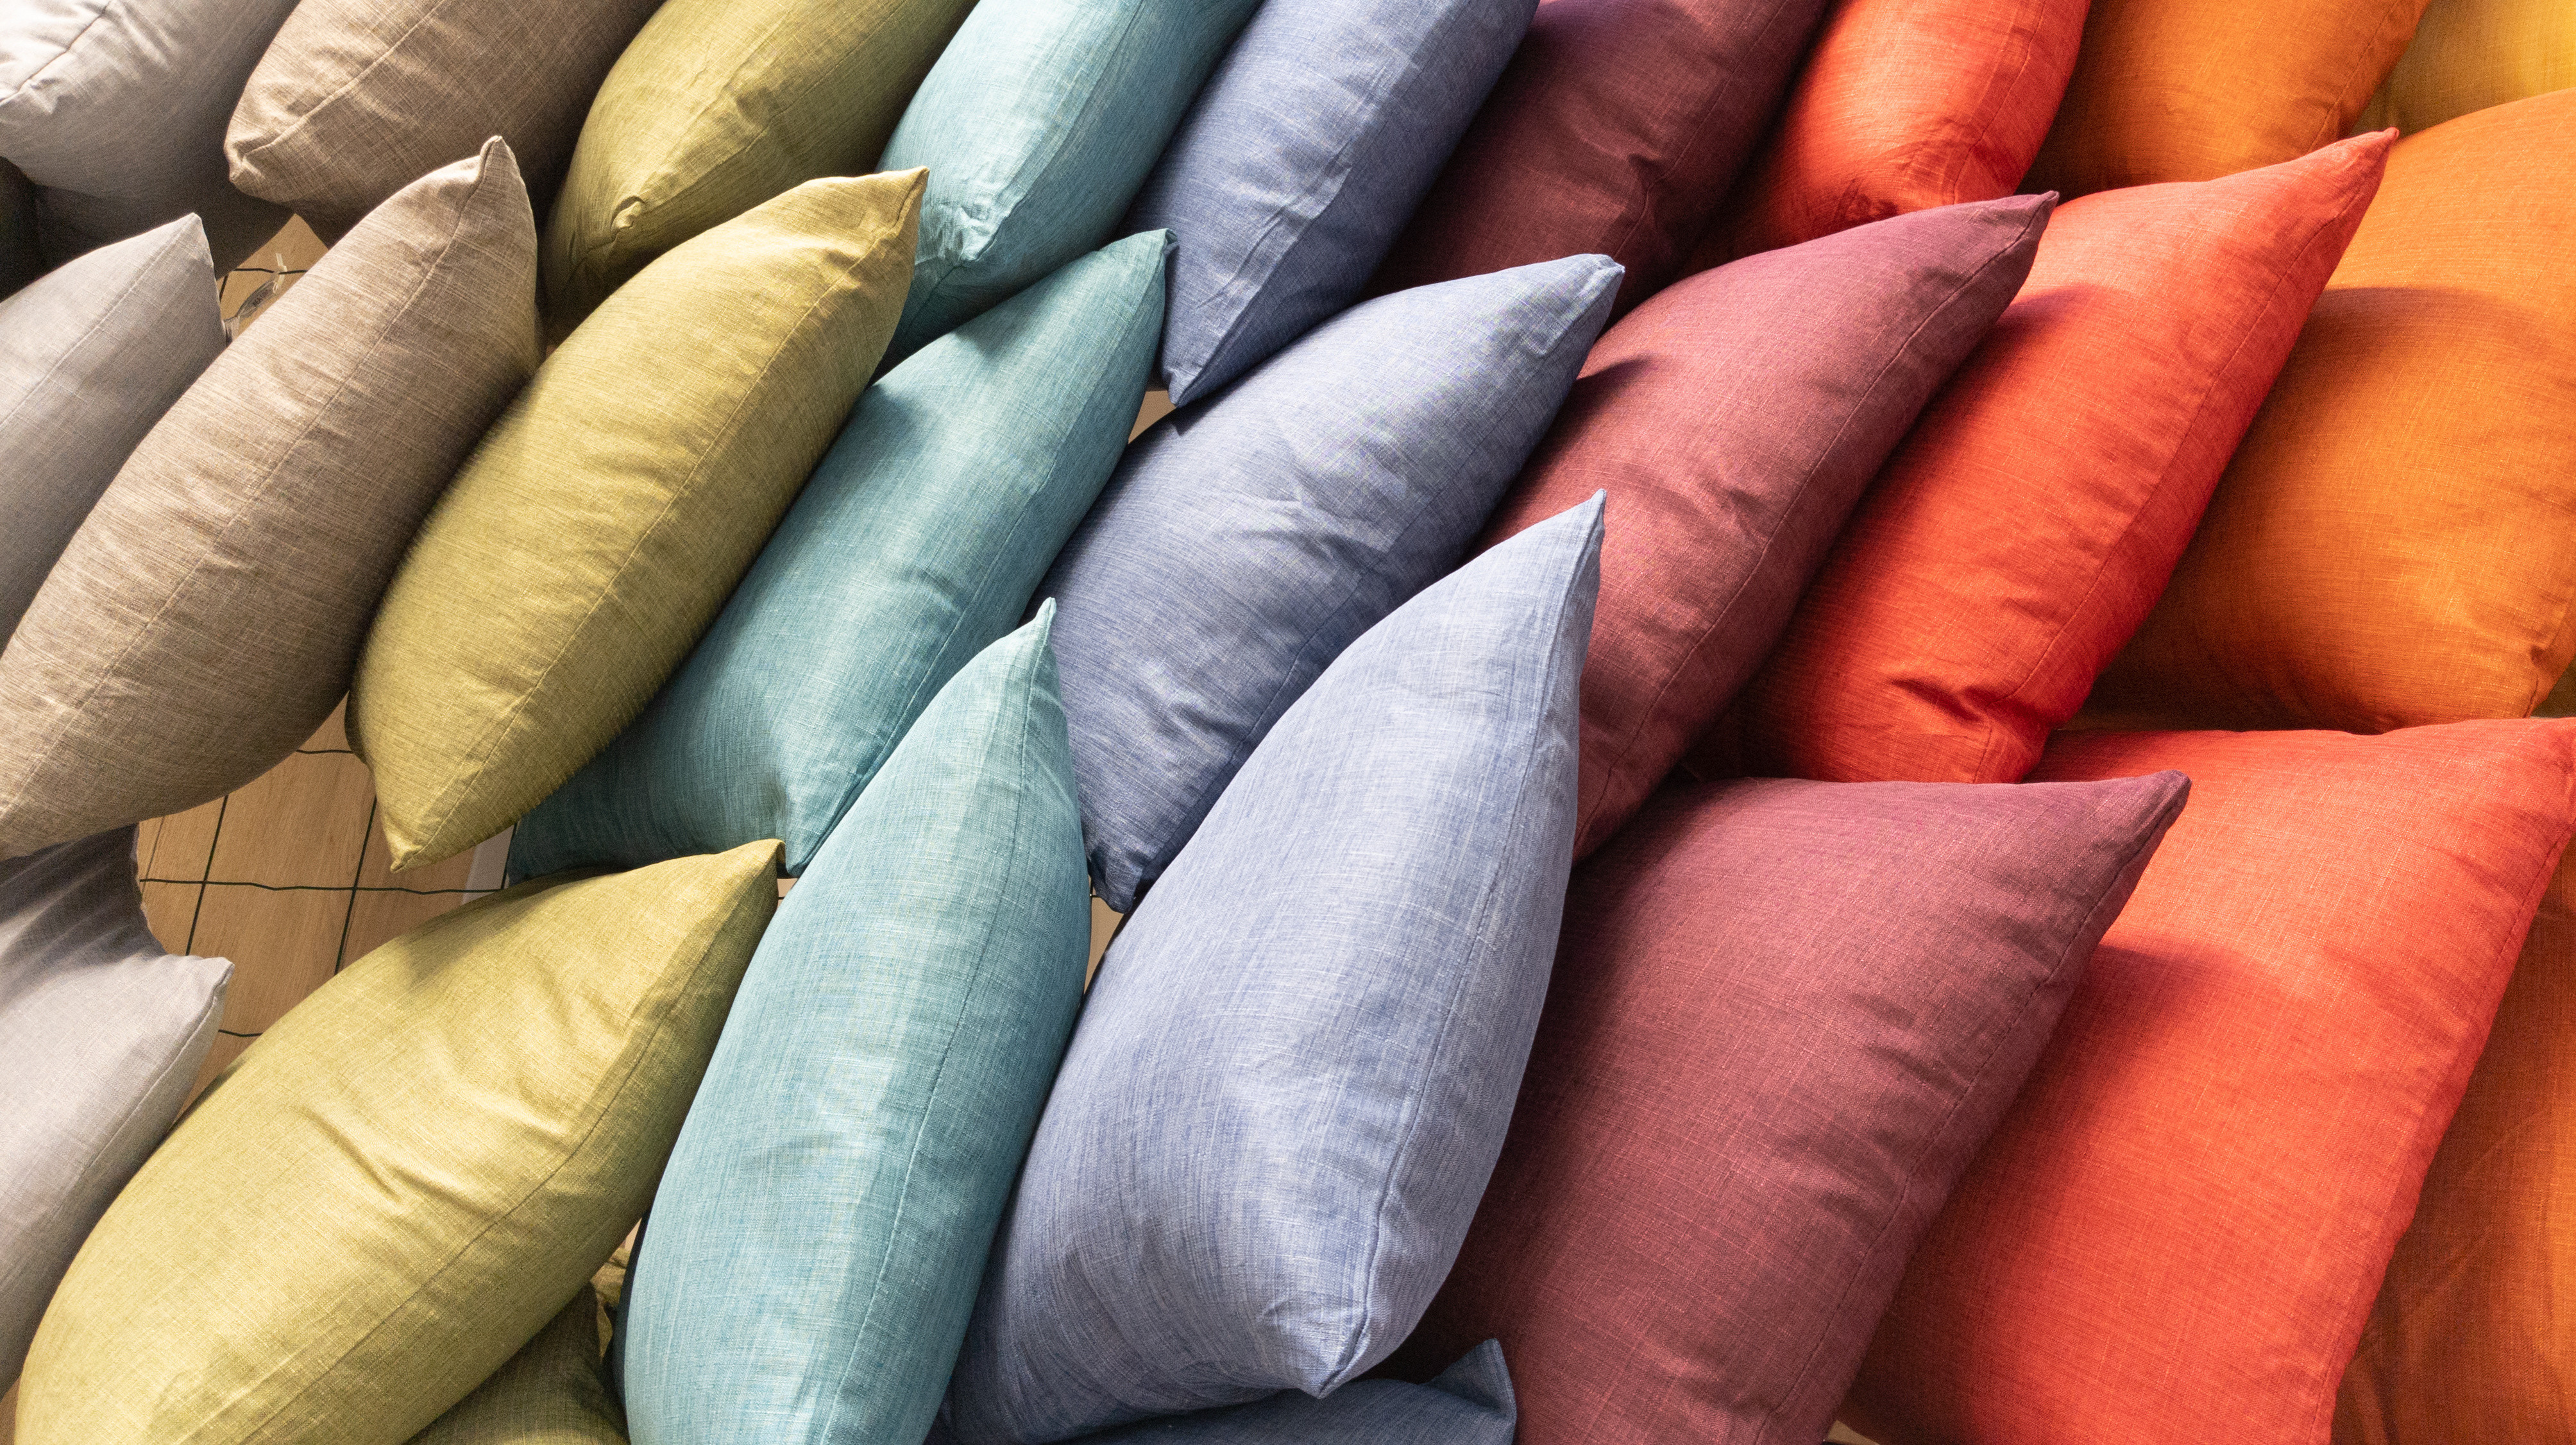 Different colored pillows stacked up